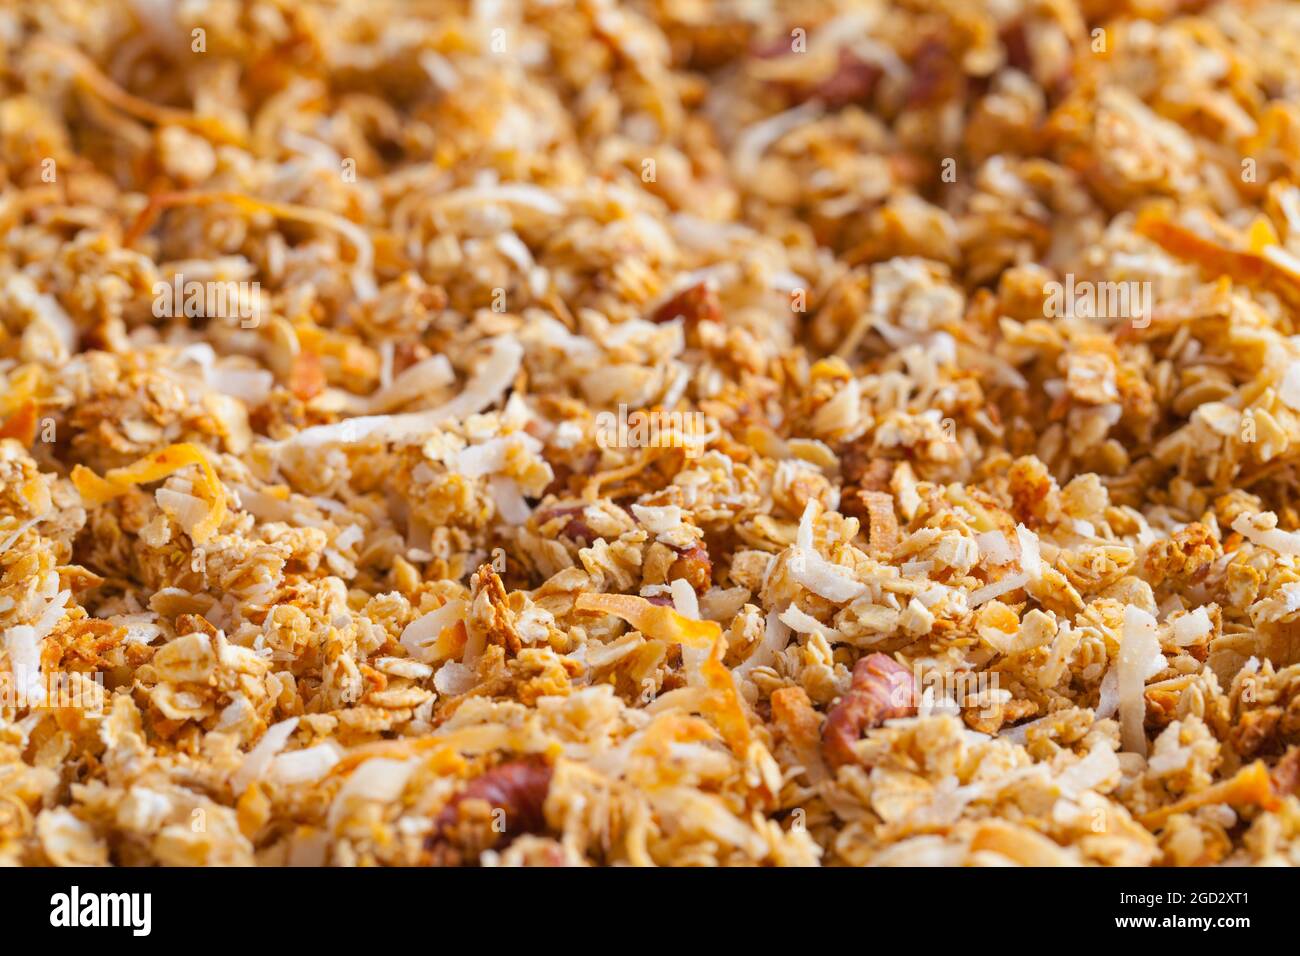 Pile of Homemade Granola Cereal Close Up Background Texture. Stock Photo